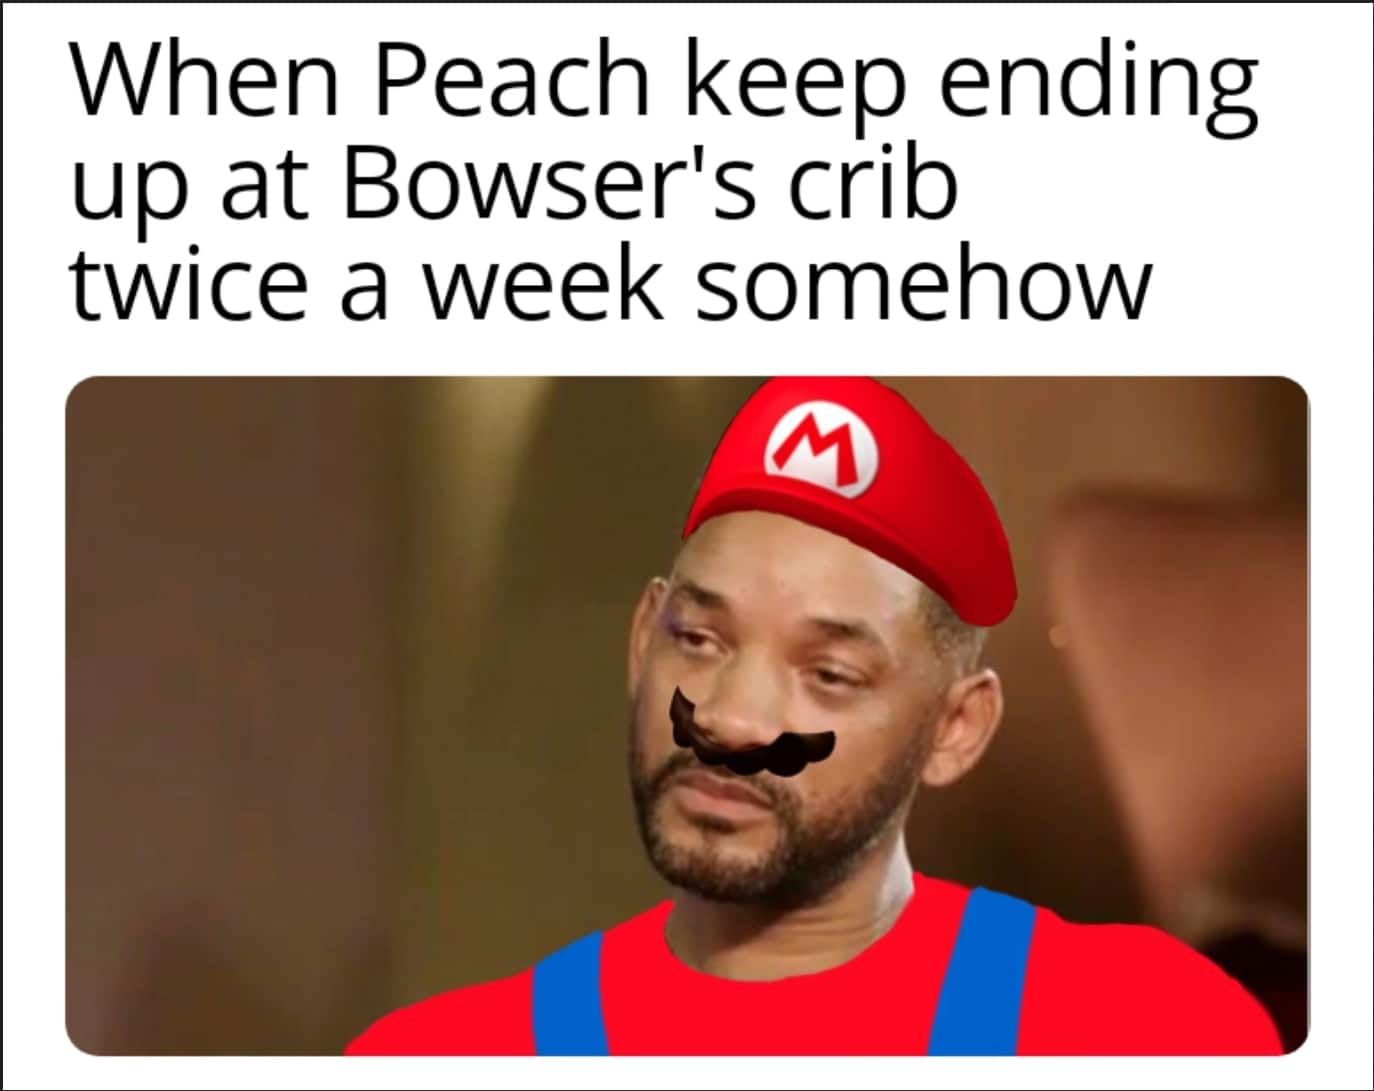 Funny, Bowser, Will Smith, Mario, Peach, August other memes Funny, Bowser, Will Smith, Mario, Peach, August text: When Peach keep ending up at Bowser's crib twice a week somehow 